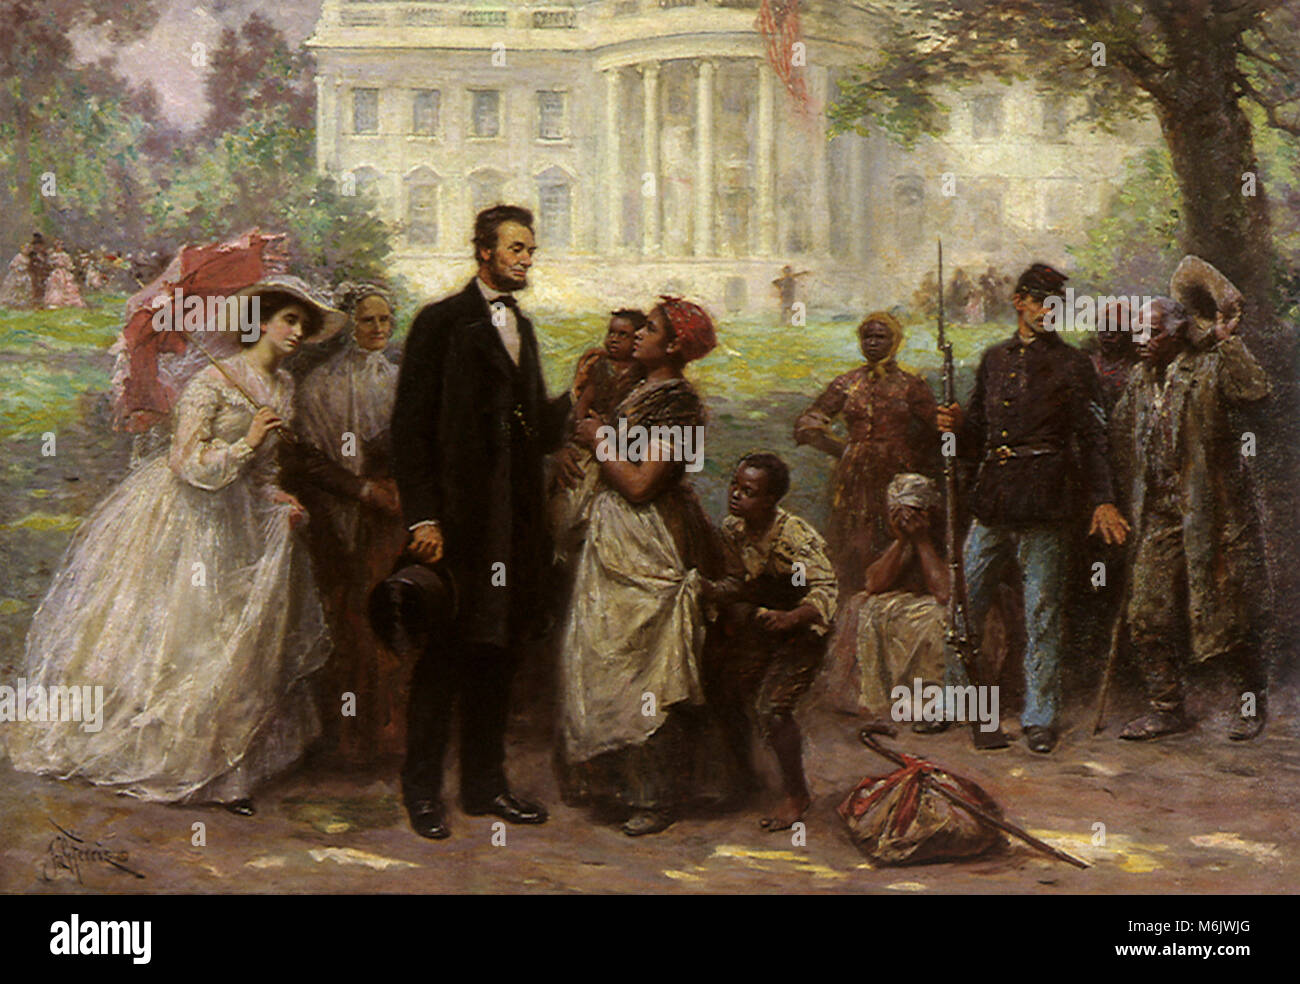 Lincoln and the Contrabands, Ferris, Jean Leon Gerome, 1863. Stock Photo